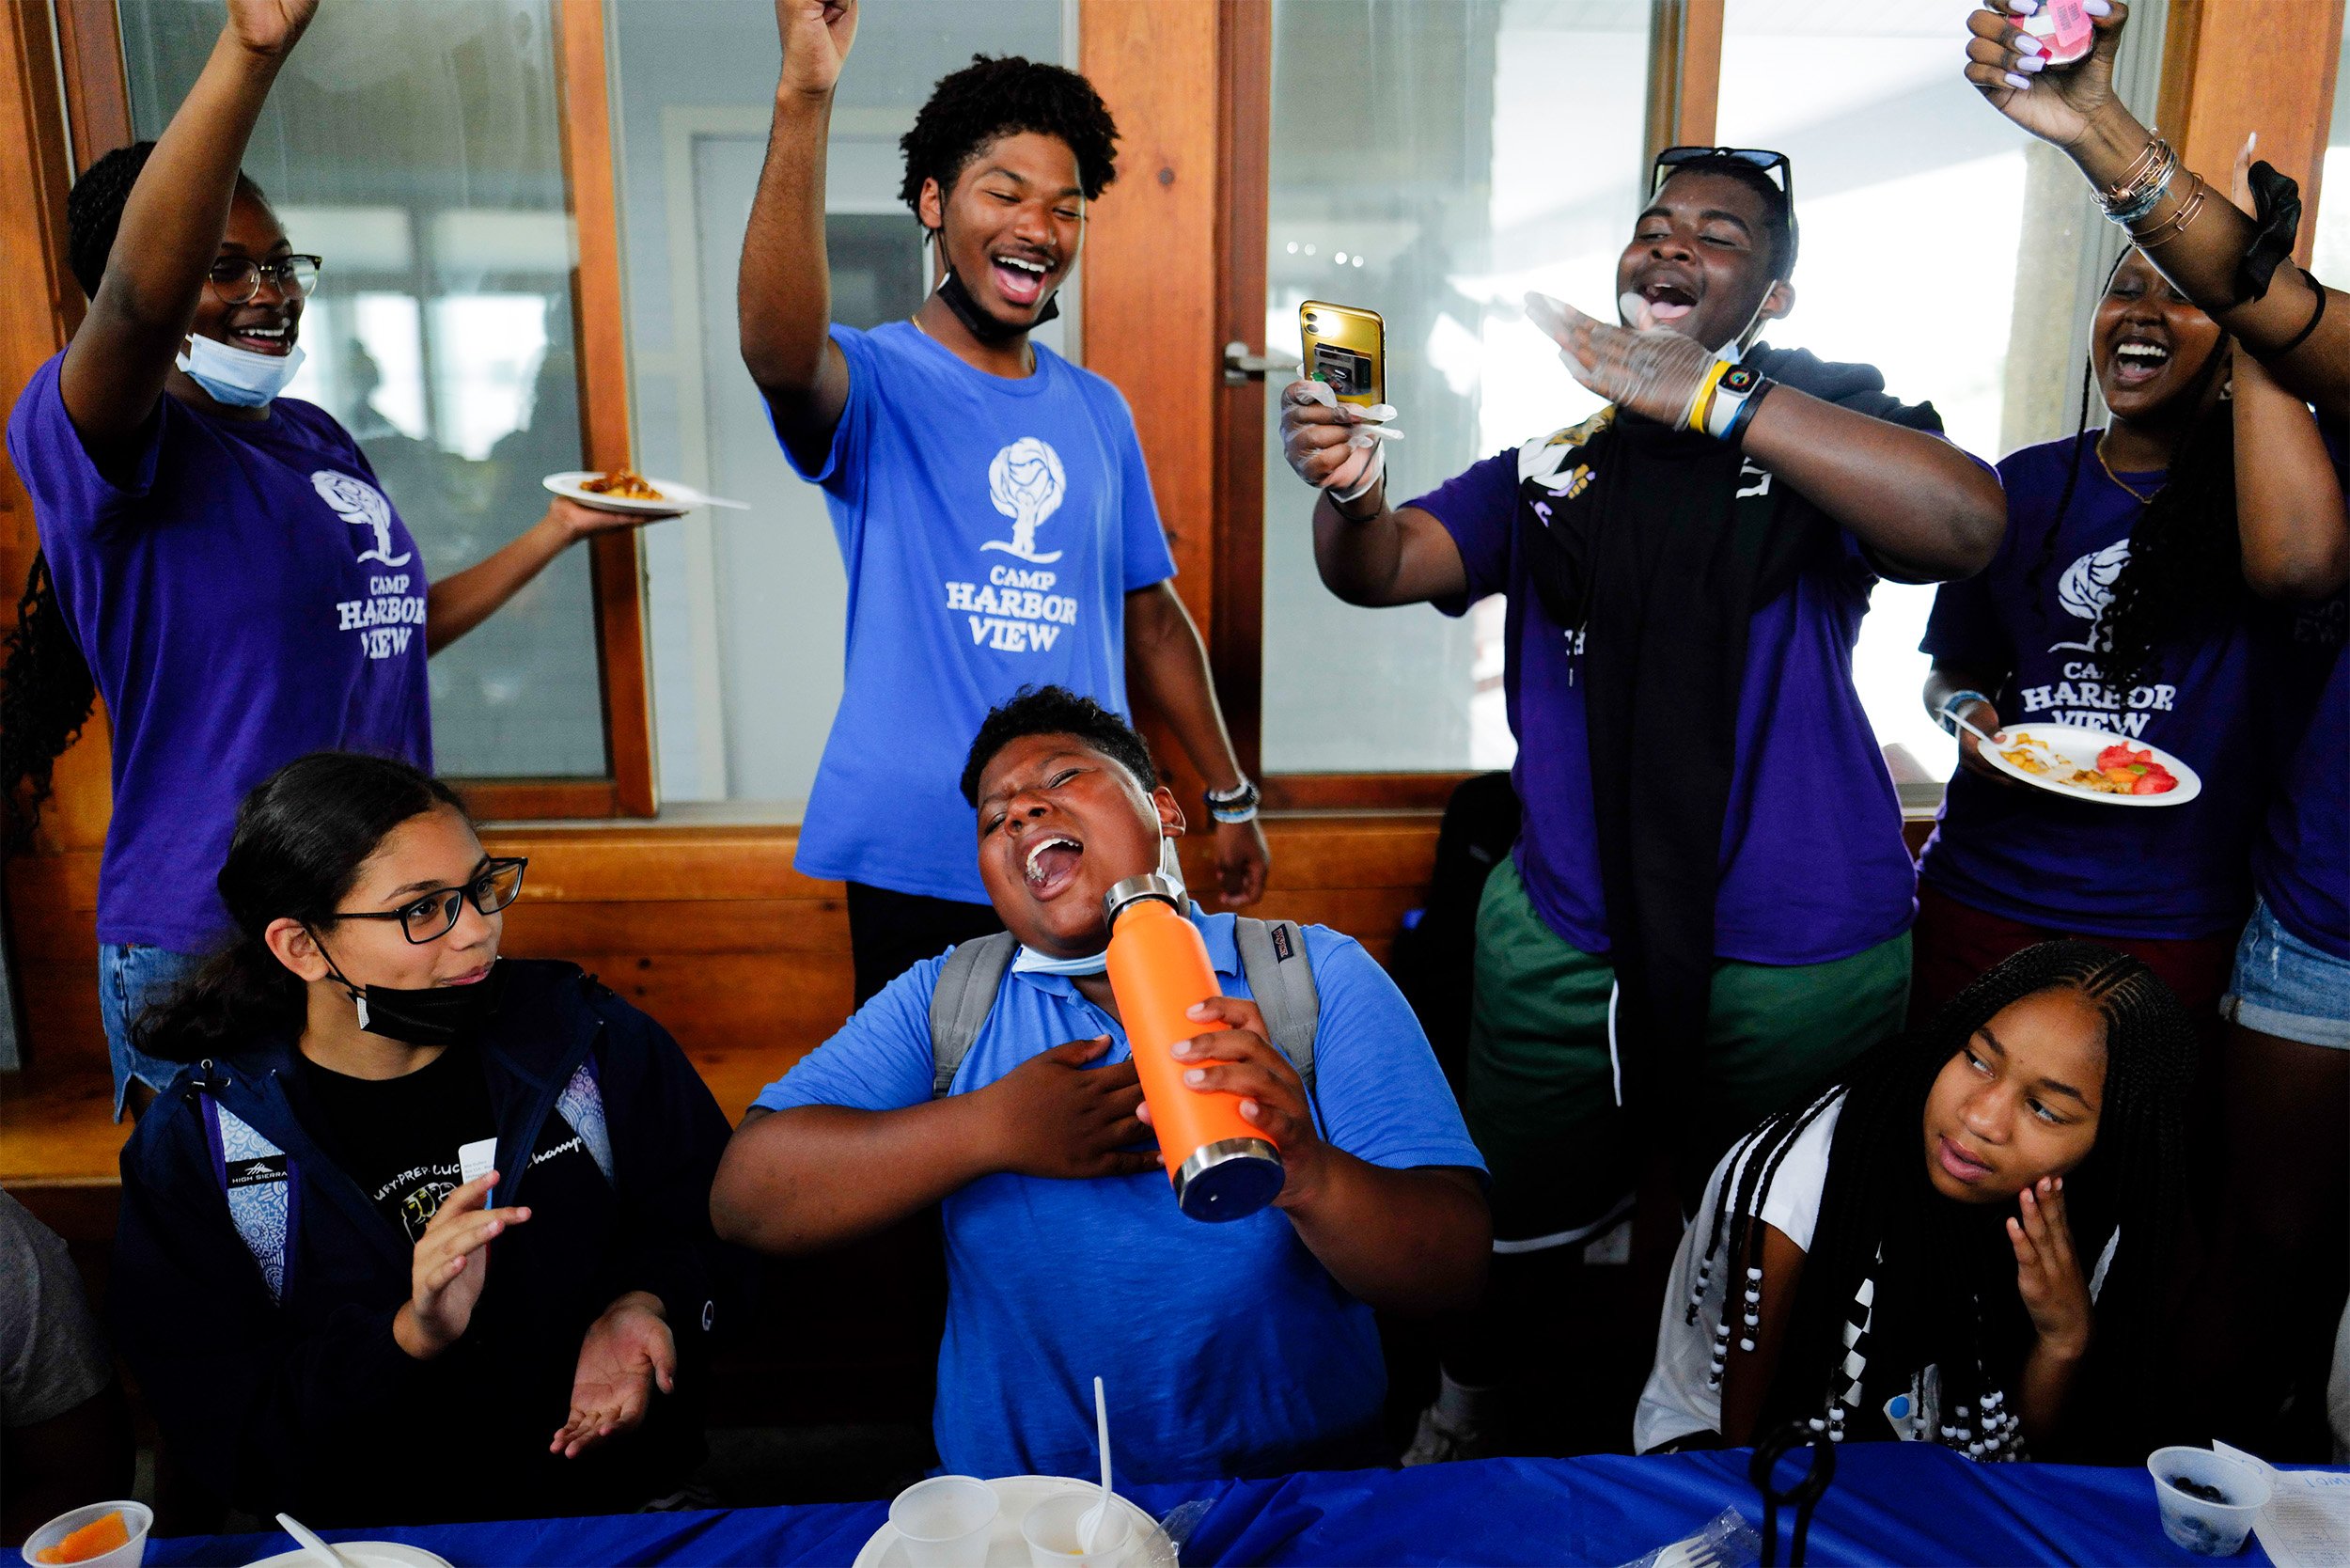  Devin Hernandez (center) sings along to “Super Bass” by Nicki Minaj during lunchtime with counselors at Camp Harborview on Long Island, Mass., on July 18, 2022. Meal time is filled with upbeat music tracks, games and chanting.  